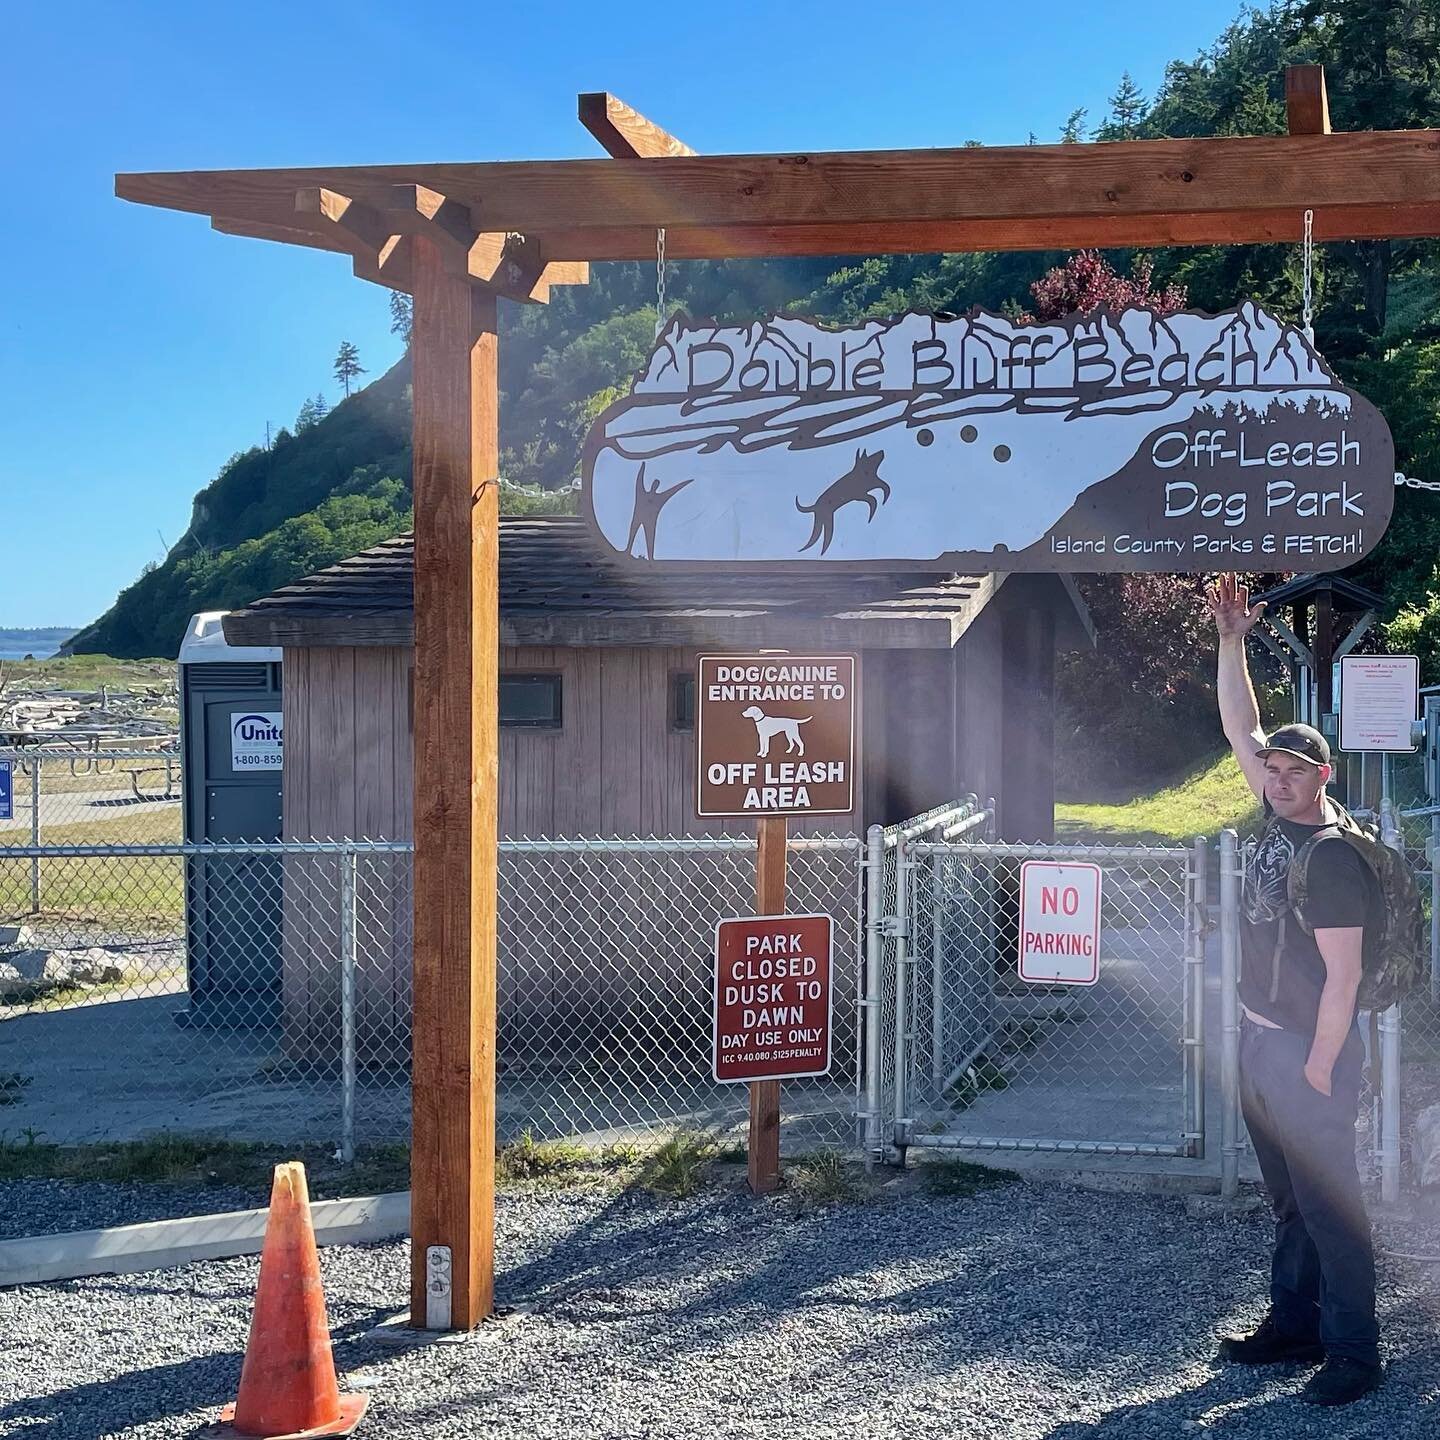 We made this sign a couple years ago. Cool to see it hanging on the beautiful structure the parks built. #doublebluff #metalsigns #custommade #dogpark #whidbeyisland #islandlife #dogsfavoriteplace #whidbeyislandgrown